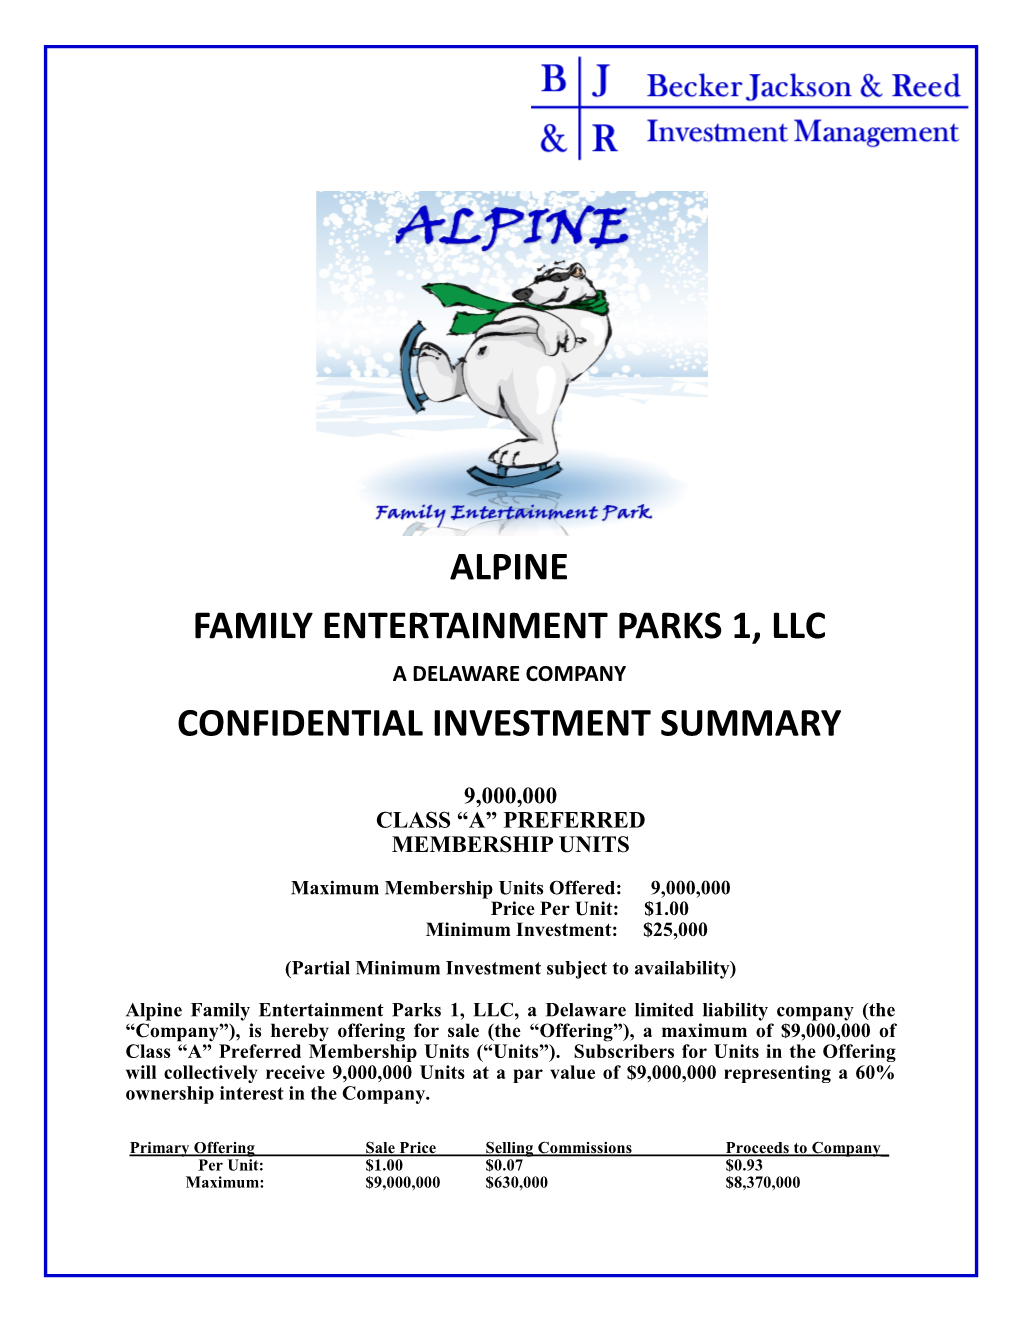 Alpine Family Entertainment Parks 1, Llc a Delaware Company Confidential Investment Summary